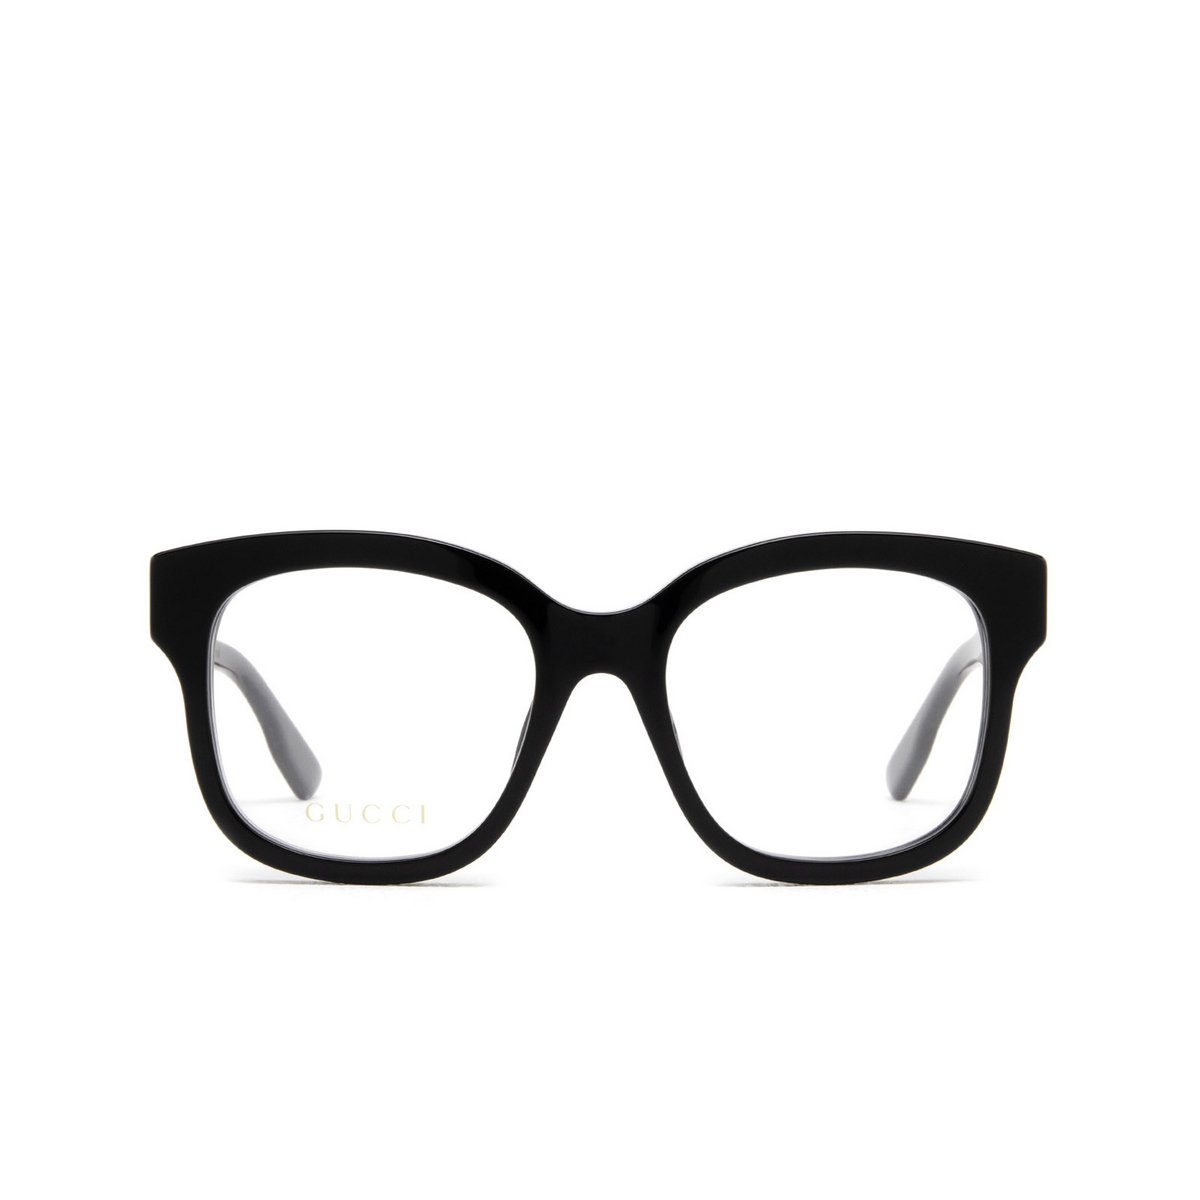 Gucci® Cat-eye Eyeglasses: GG1155O color Black 001 - front view.